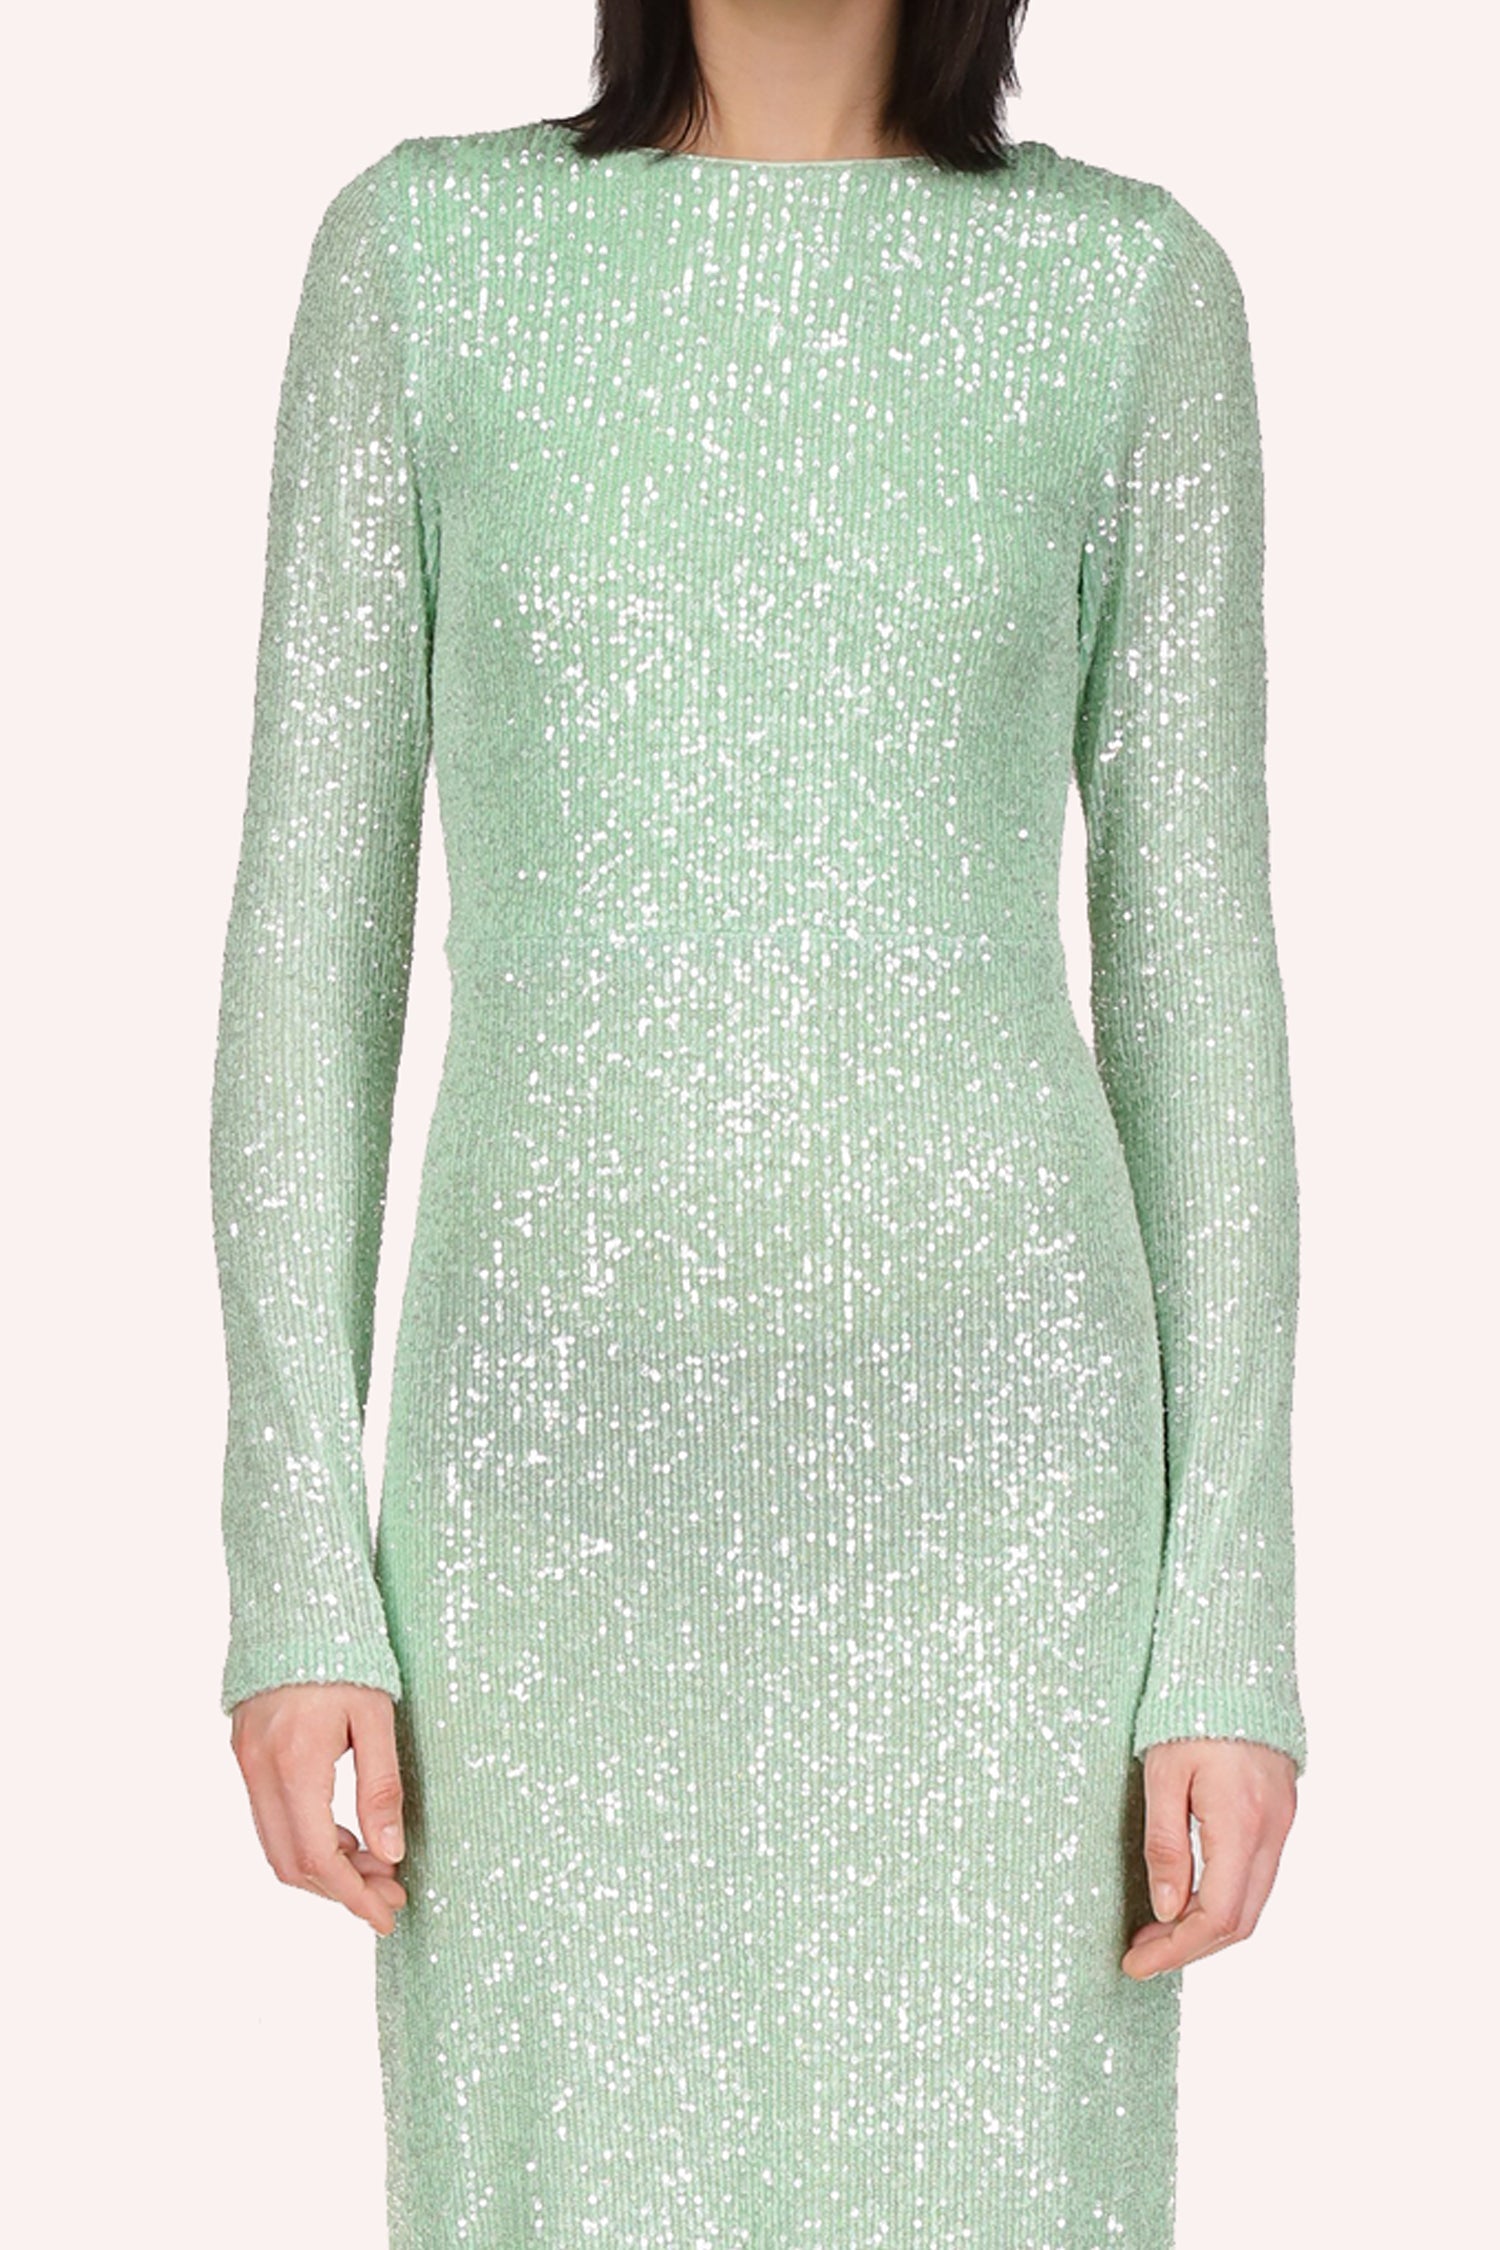 Sequin Mesh Dress Peppermint, designed by Anna Sui, is a sophisticated gown in a soft peppermint color